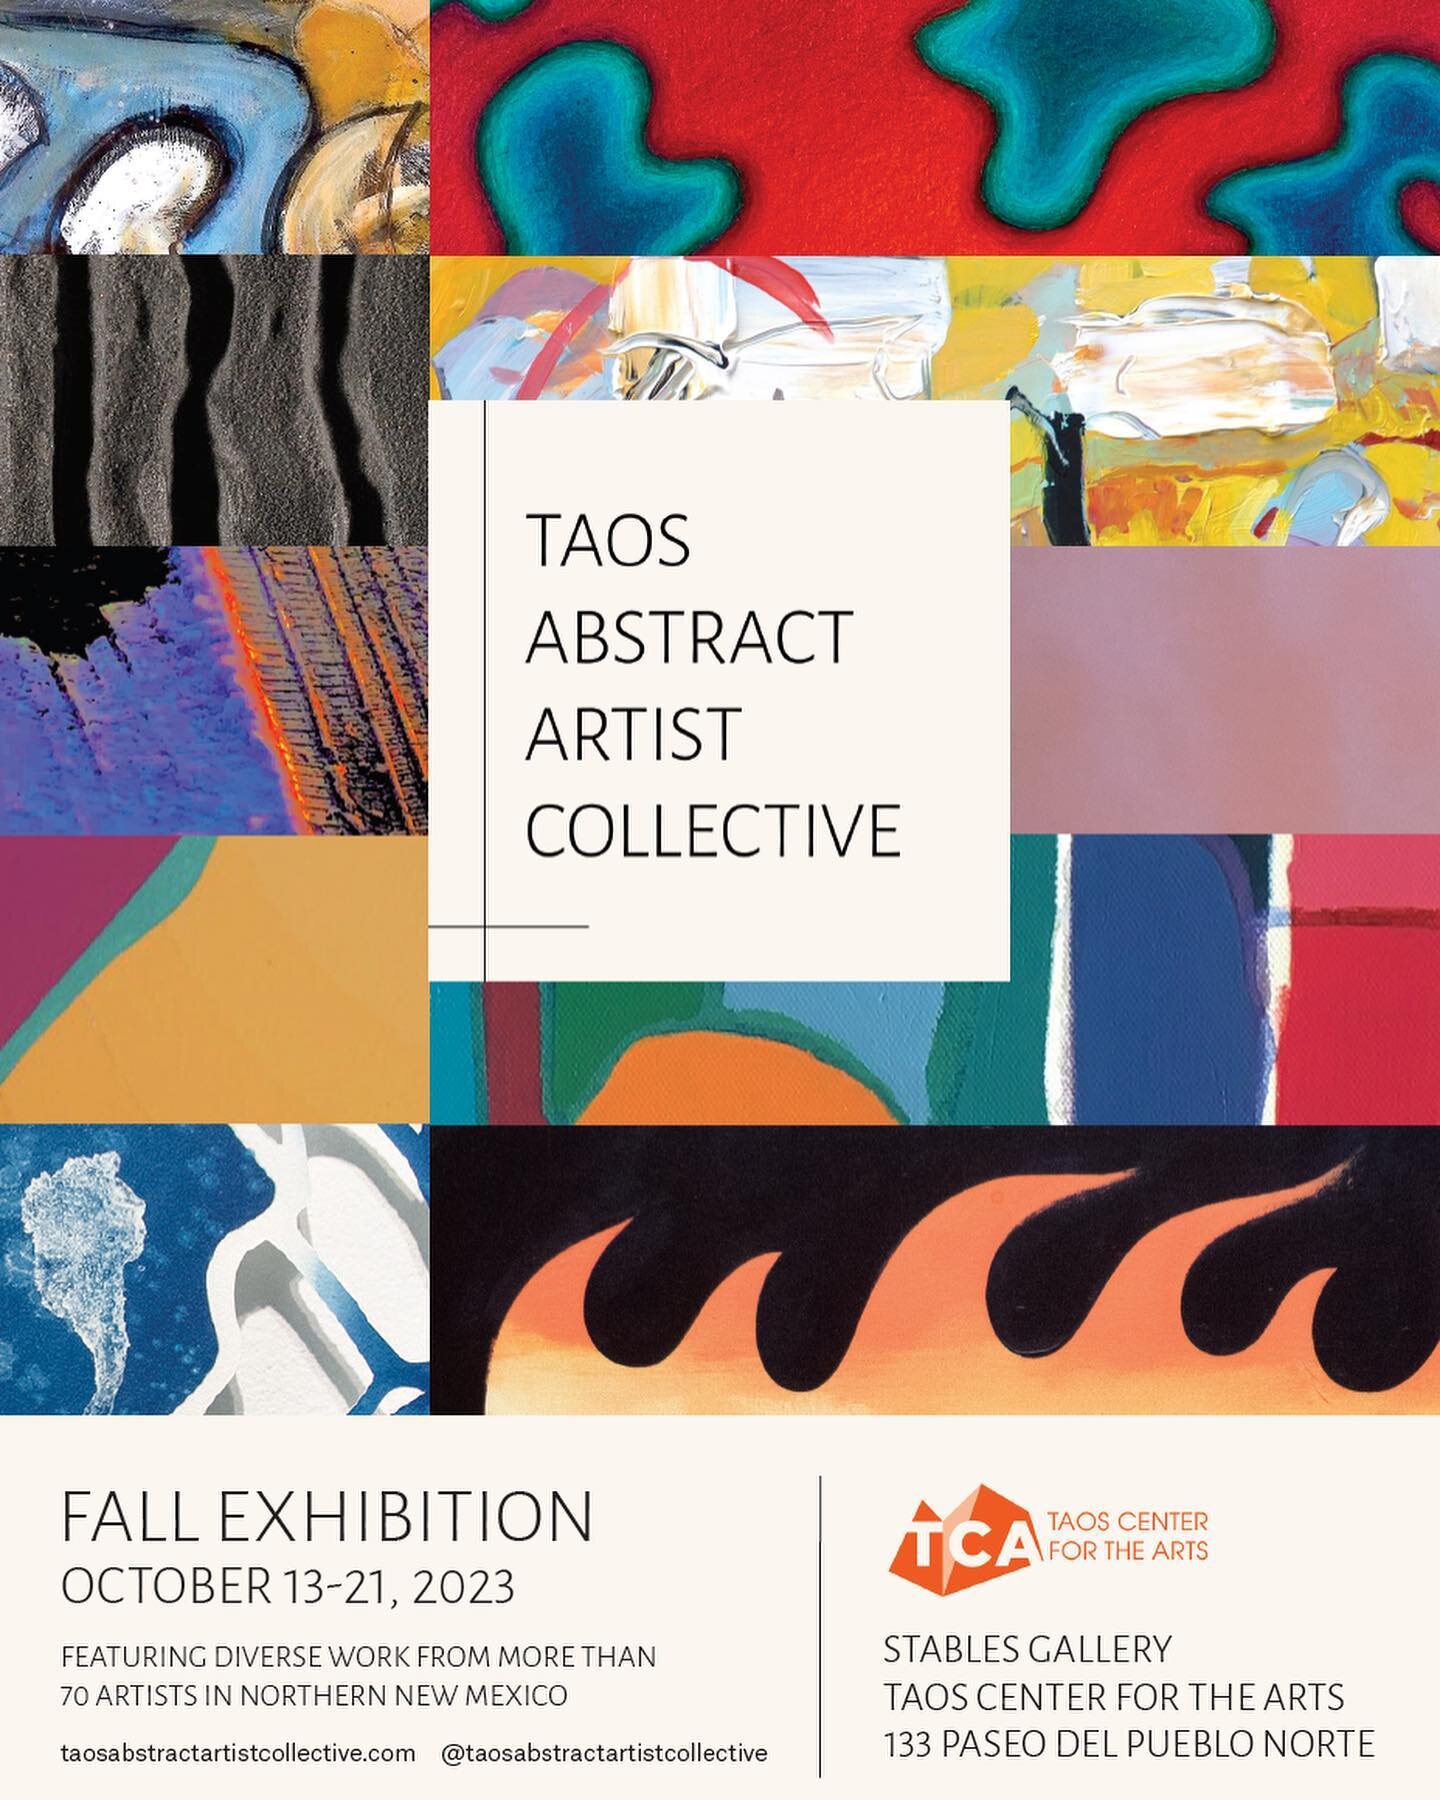 My drawing &ldquo;Boundless Circumstance&rdquo; is included in the @taosabstractartistcollective Fall Exhibition at the Taos Center for the Arts - Stables Art Gallery in Taos, New Mexico, Oct. 13 - 21